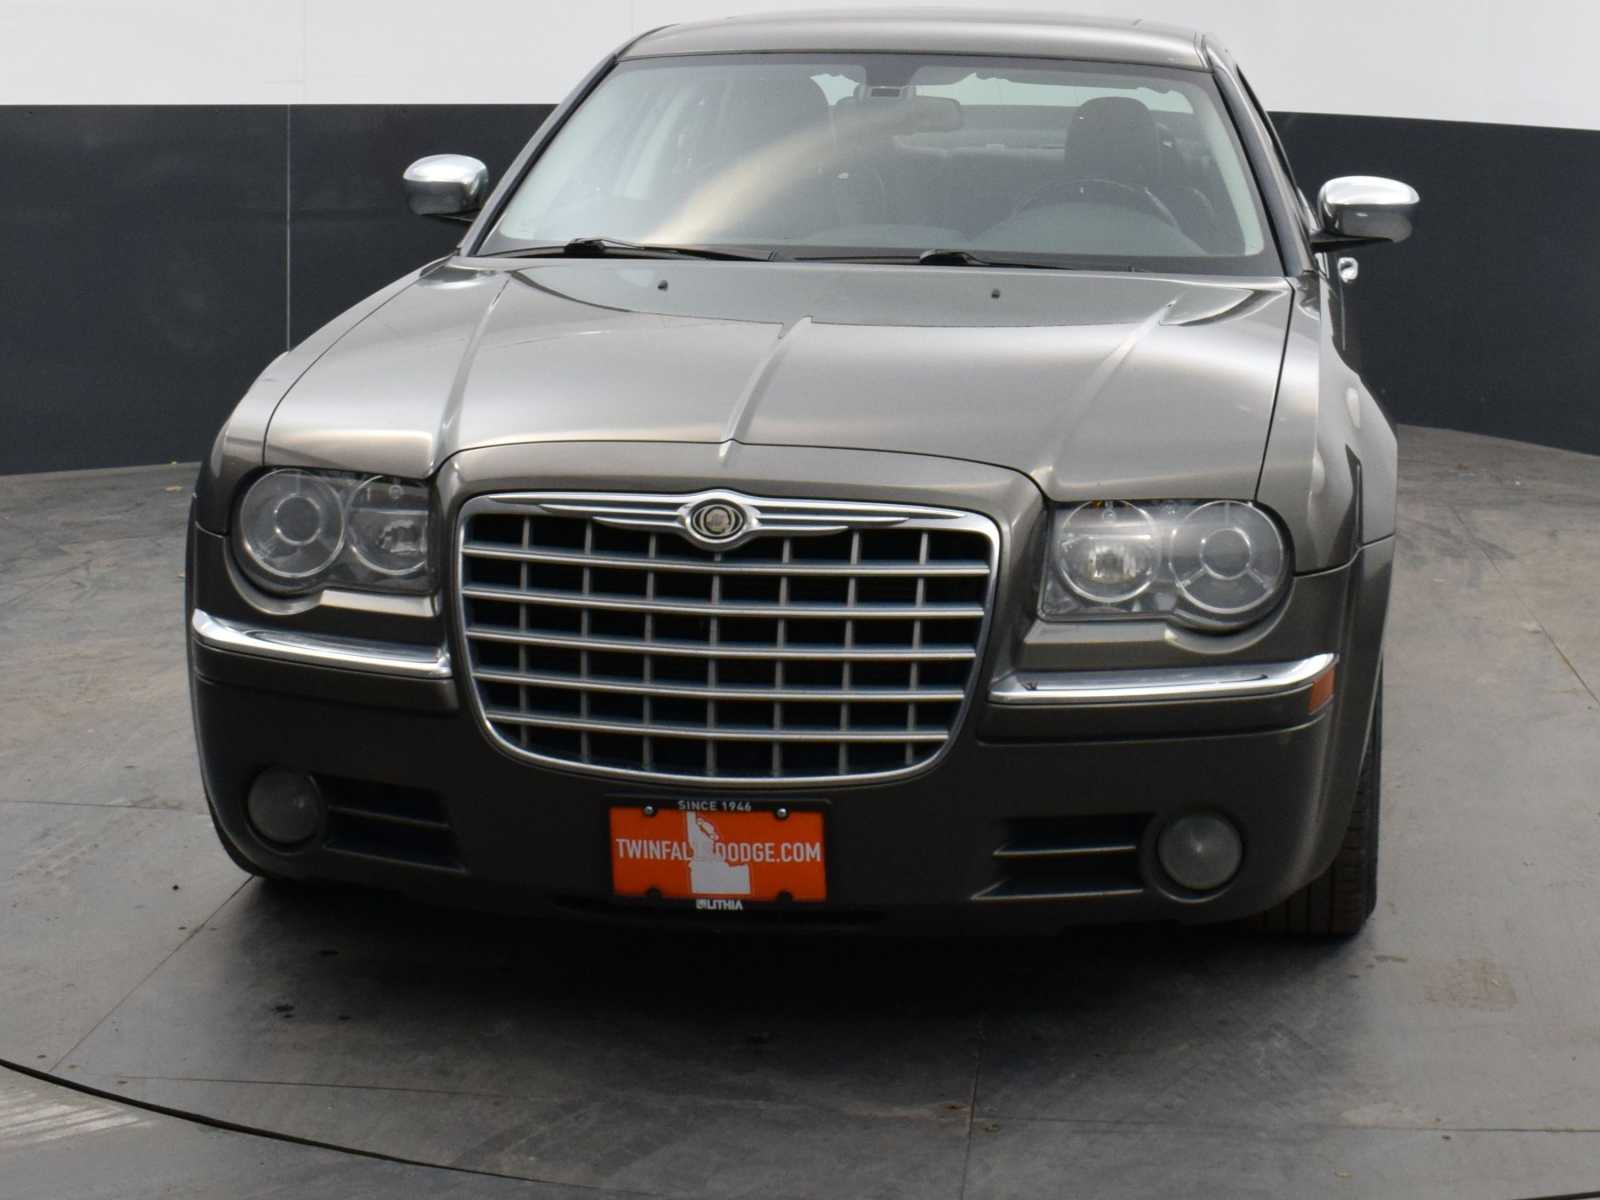 Used 2009 Chrysler 300 C with VIN 2C3LA63T59H525393 for sale in Twin Falls, ID